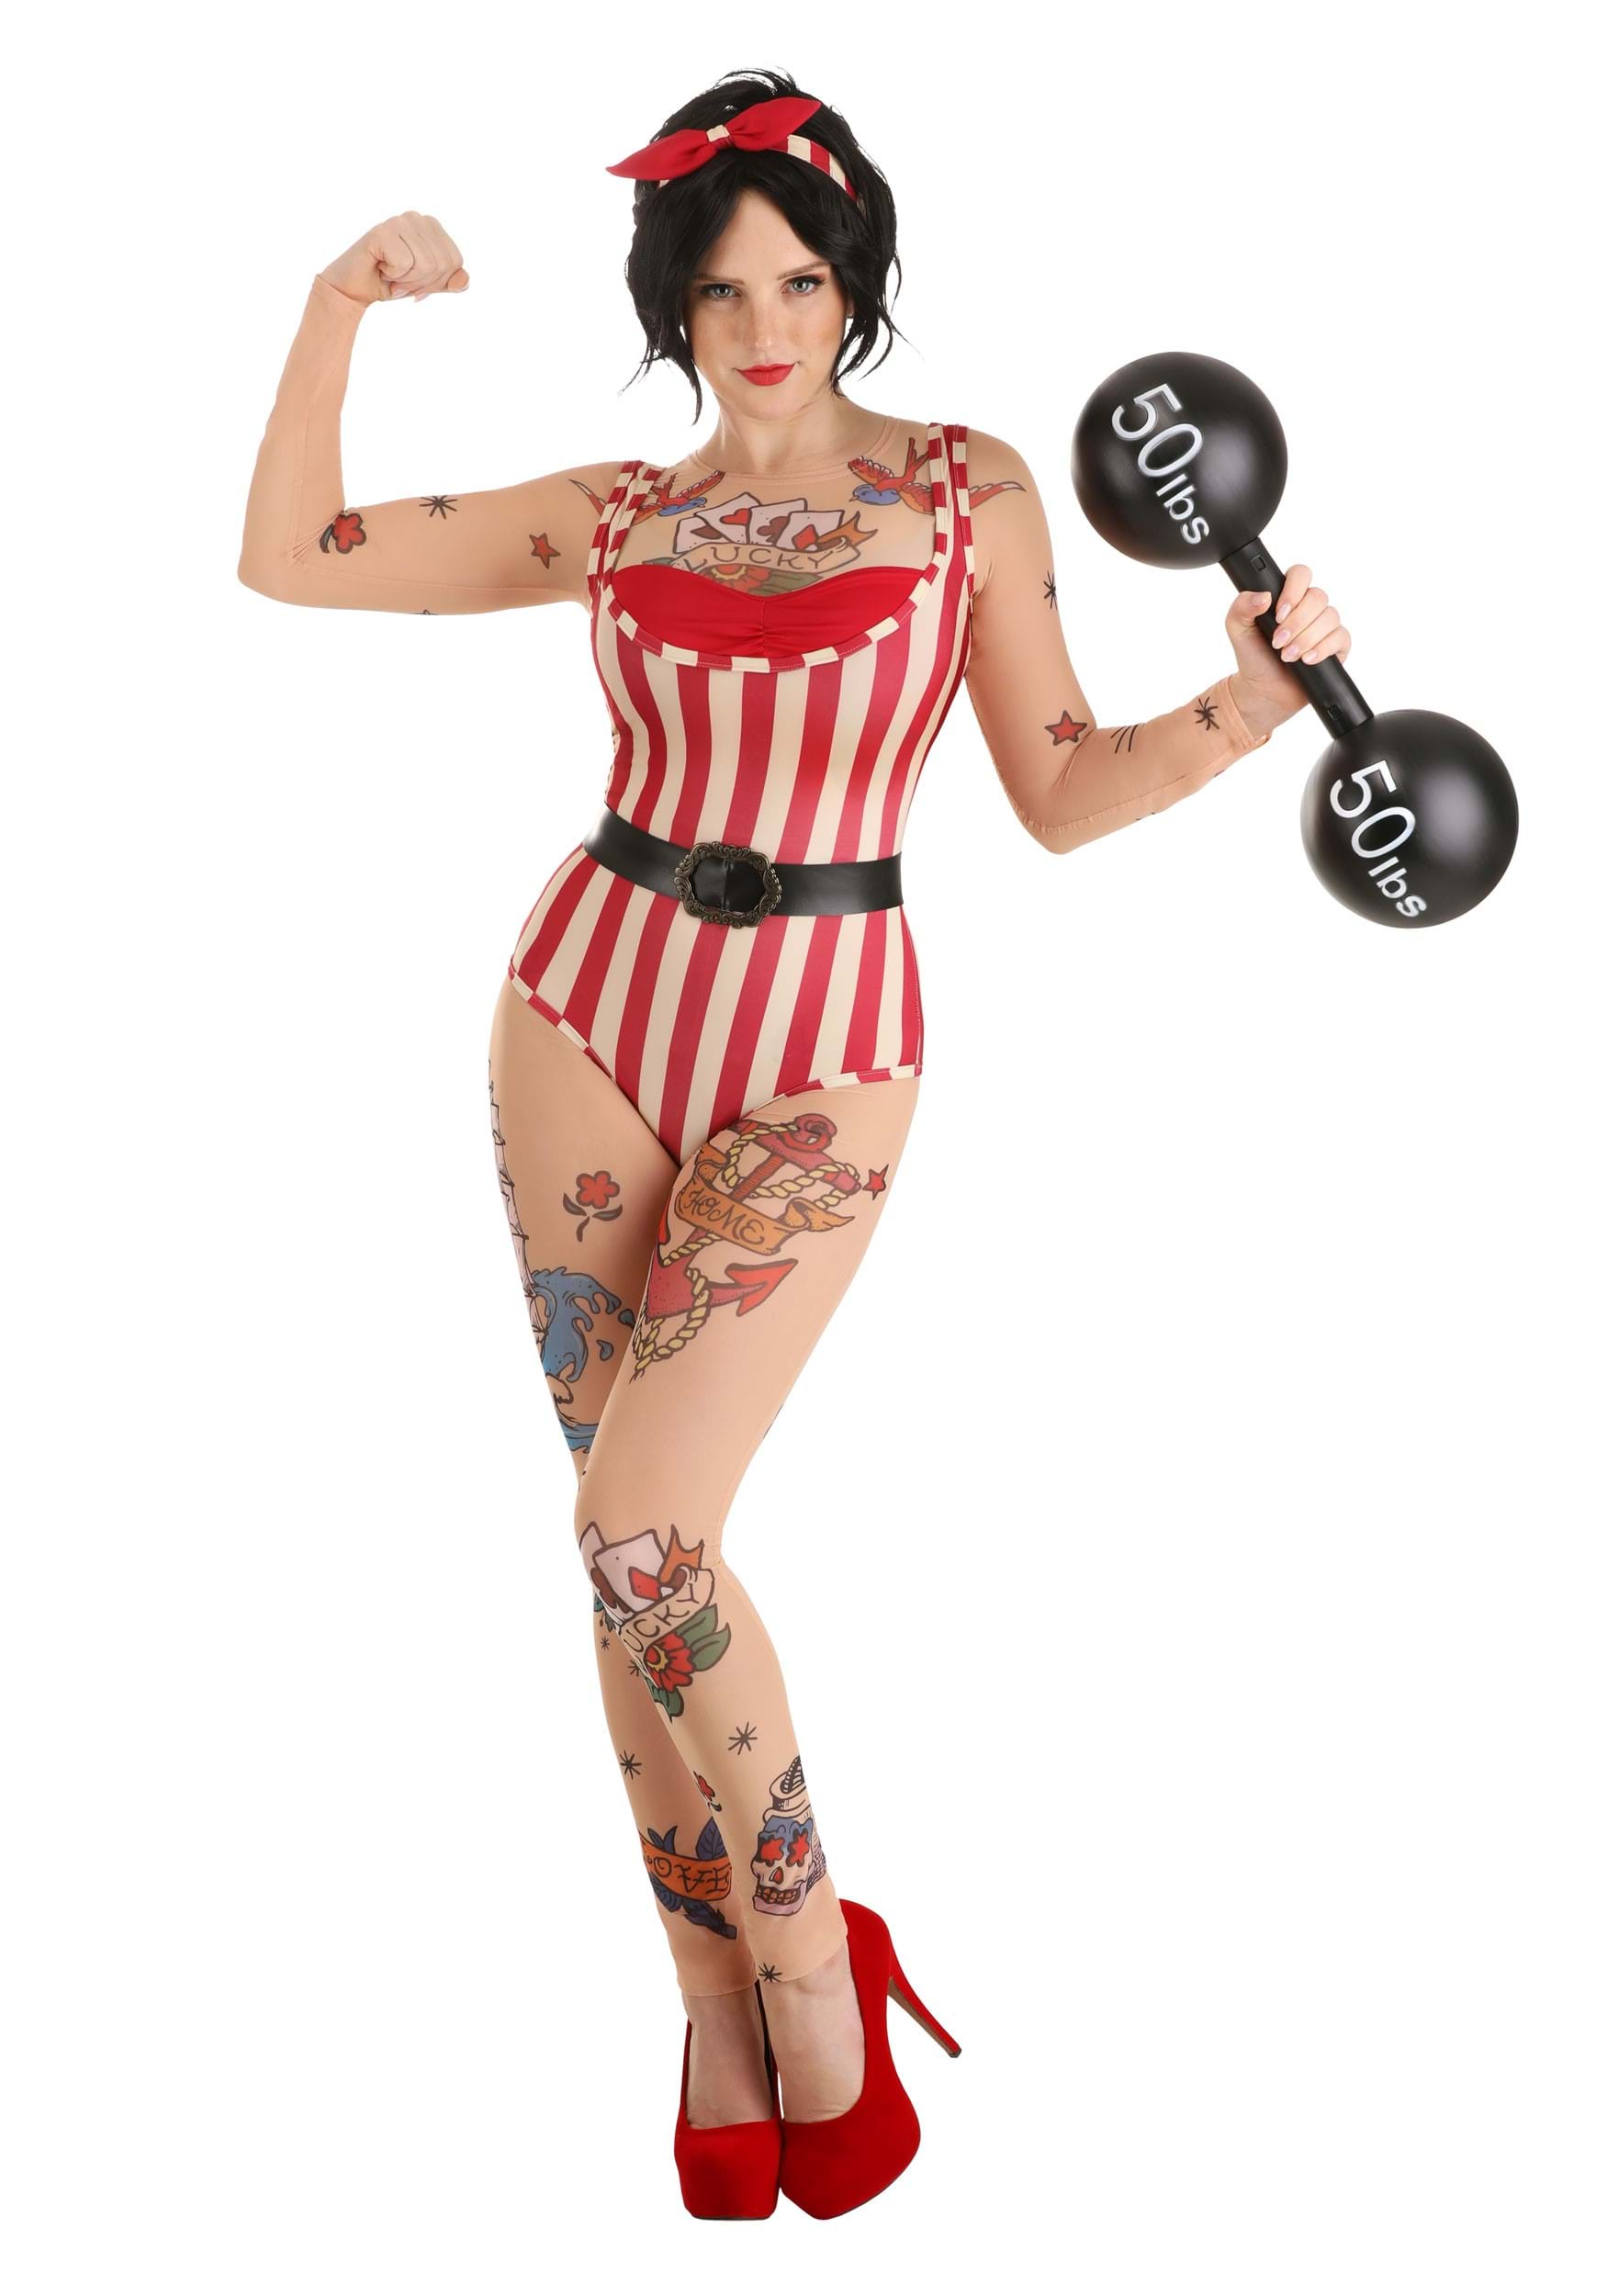 https://images.halloweencostumes.ca/products/61218/1-1/womens-vintage-strong-woman-costume.jpg